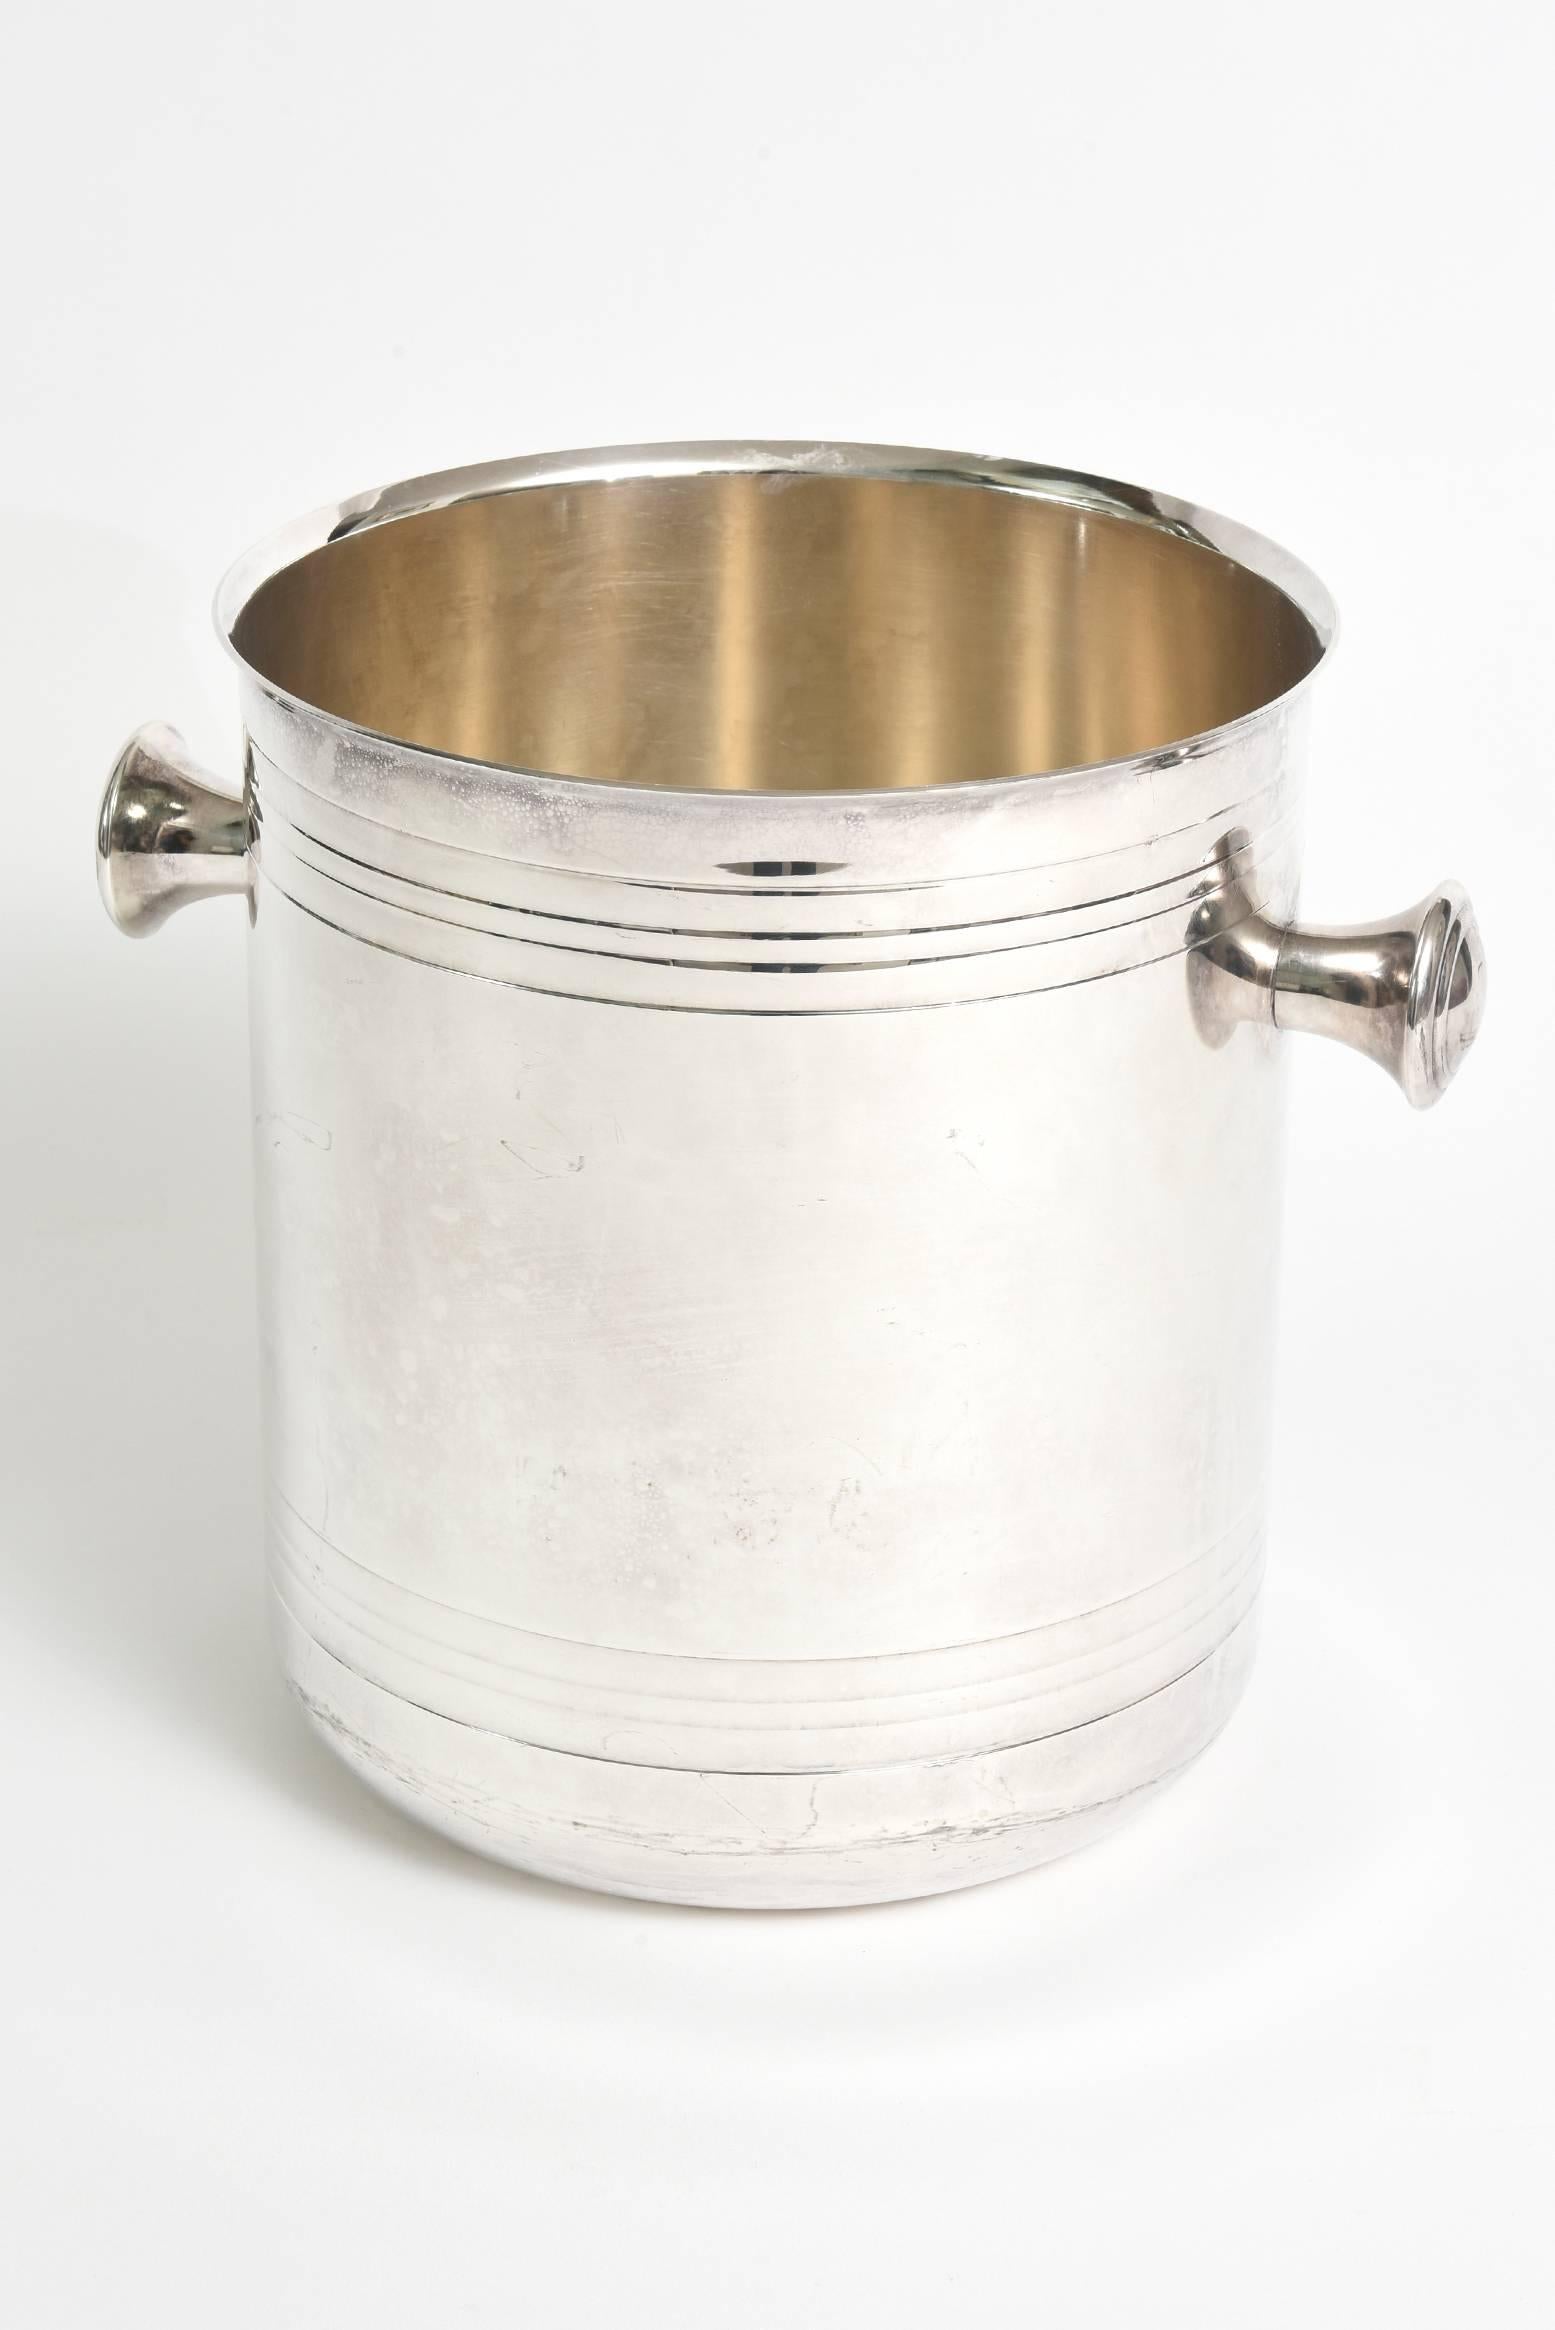 This lovely French hallmarked Christofle champagne cooler and or ice bucket is silver-plate and from the 1980s. It is reminiscent of an art deco design with modernist influences. A great barware edition. It is hallmarked in 2 places. The diameter